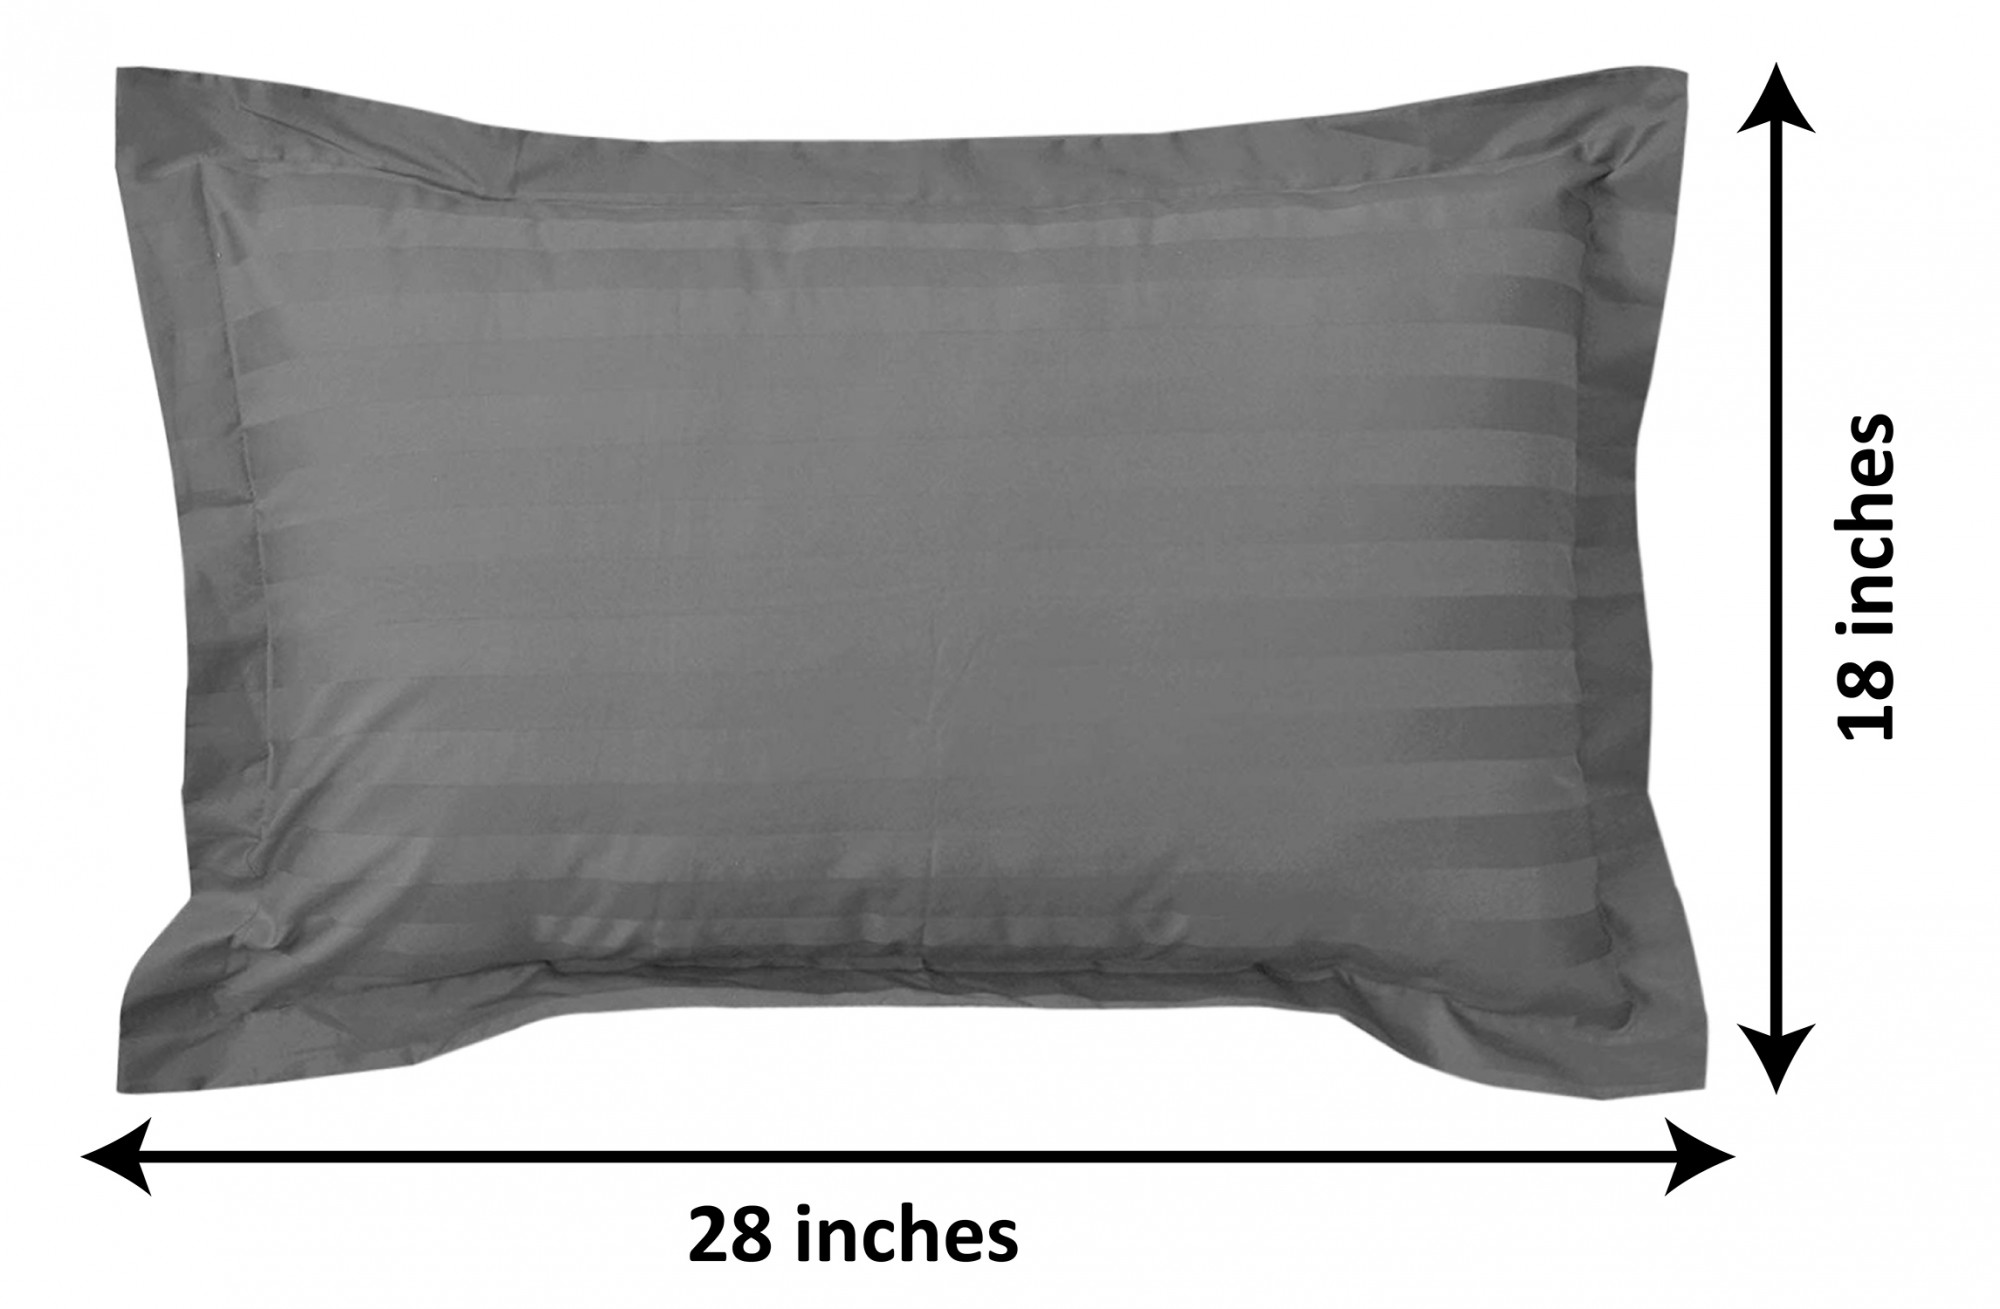 Kuber Industries Lining Design Breathable & Soft Cotton Pillow Cover/Protector/Case- 18x28 Inch,(Grey)-HS43KUBMART26755